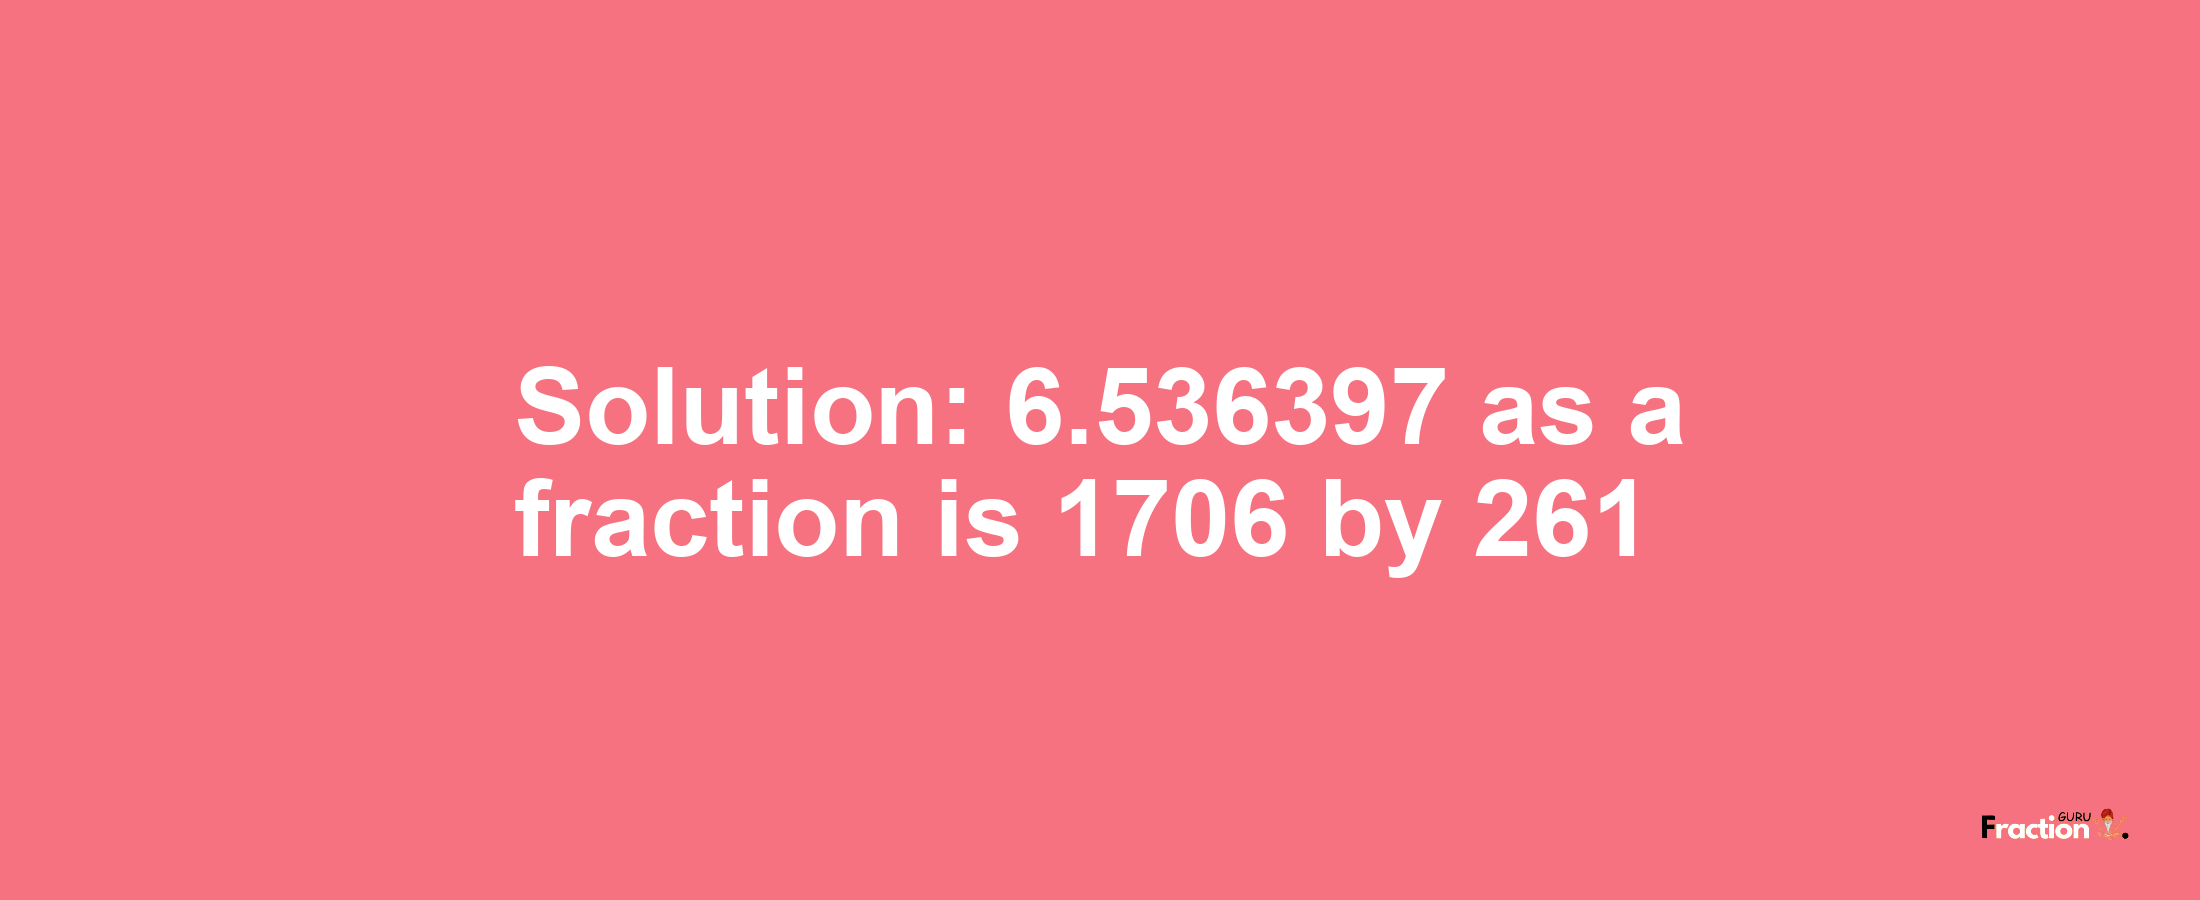 Solution:6.536397 as a fraction is 1706/261